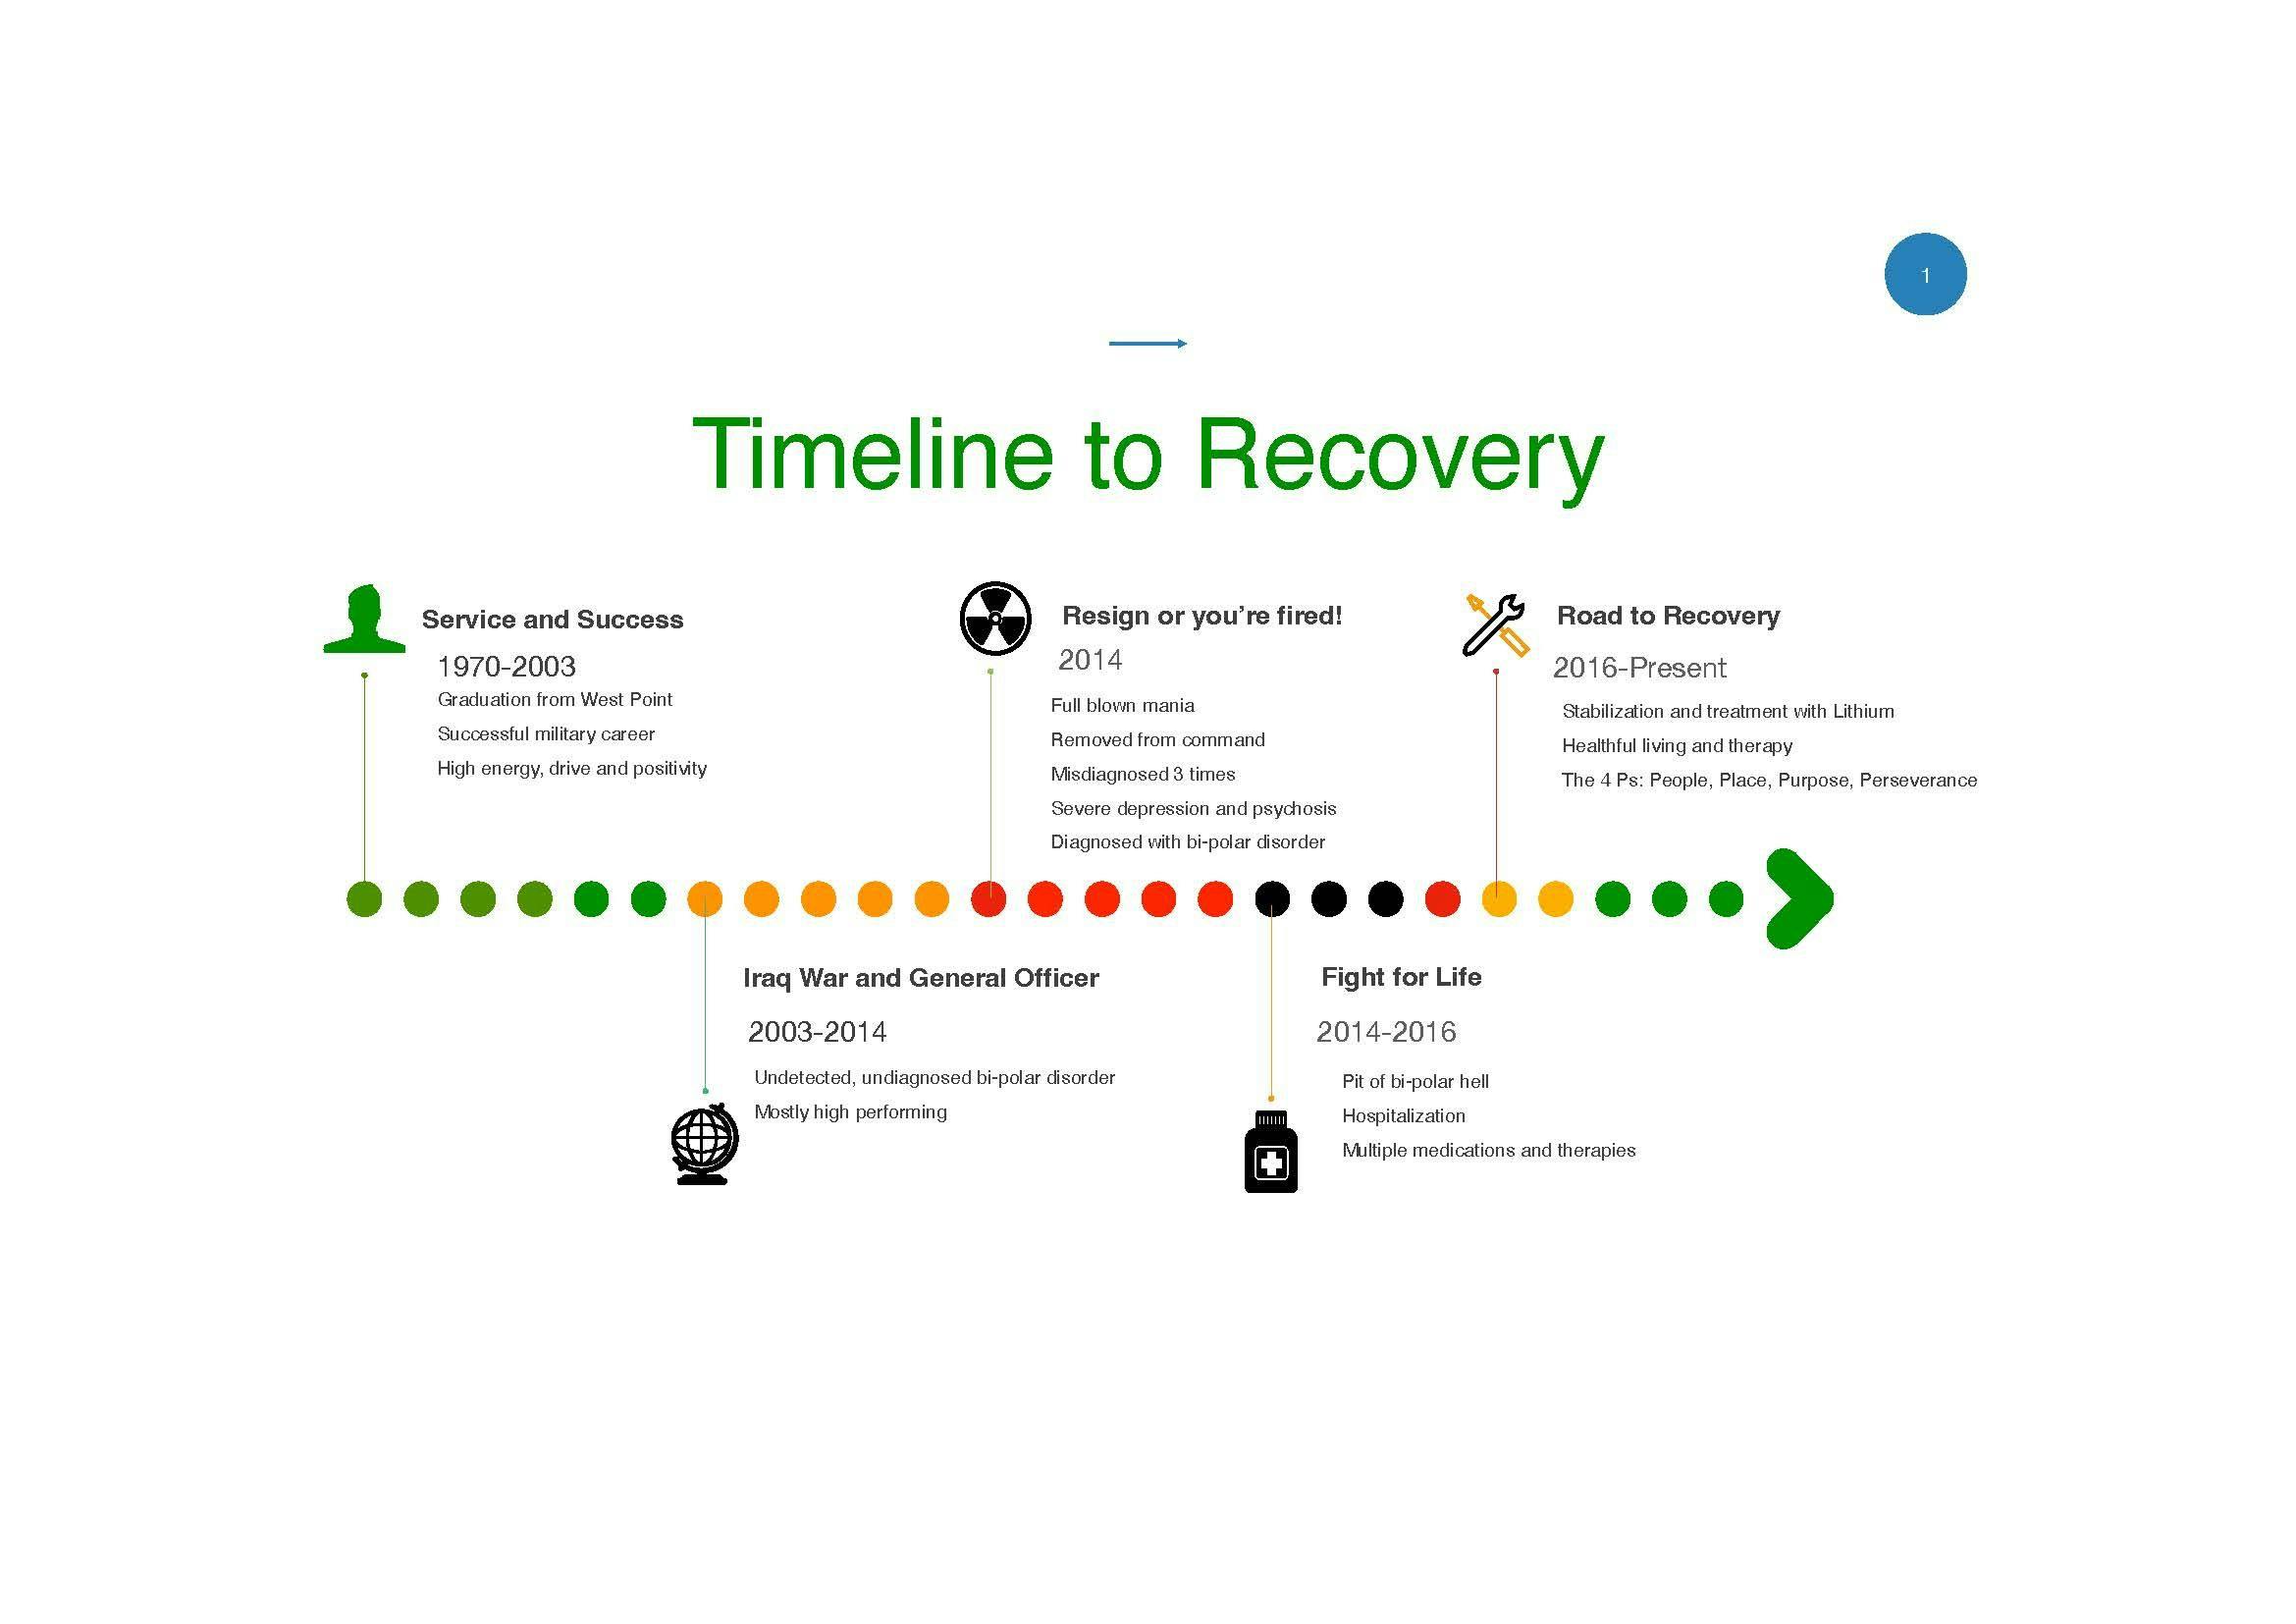 Figure 1. Timeline to Recovery